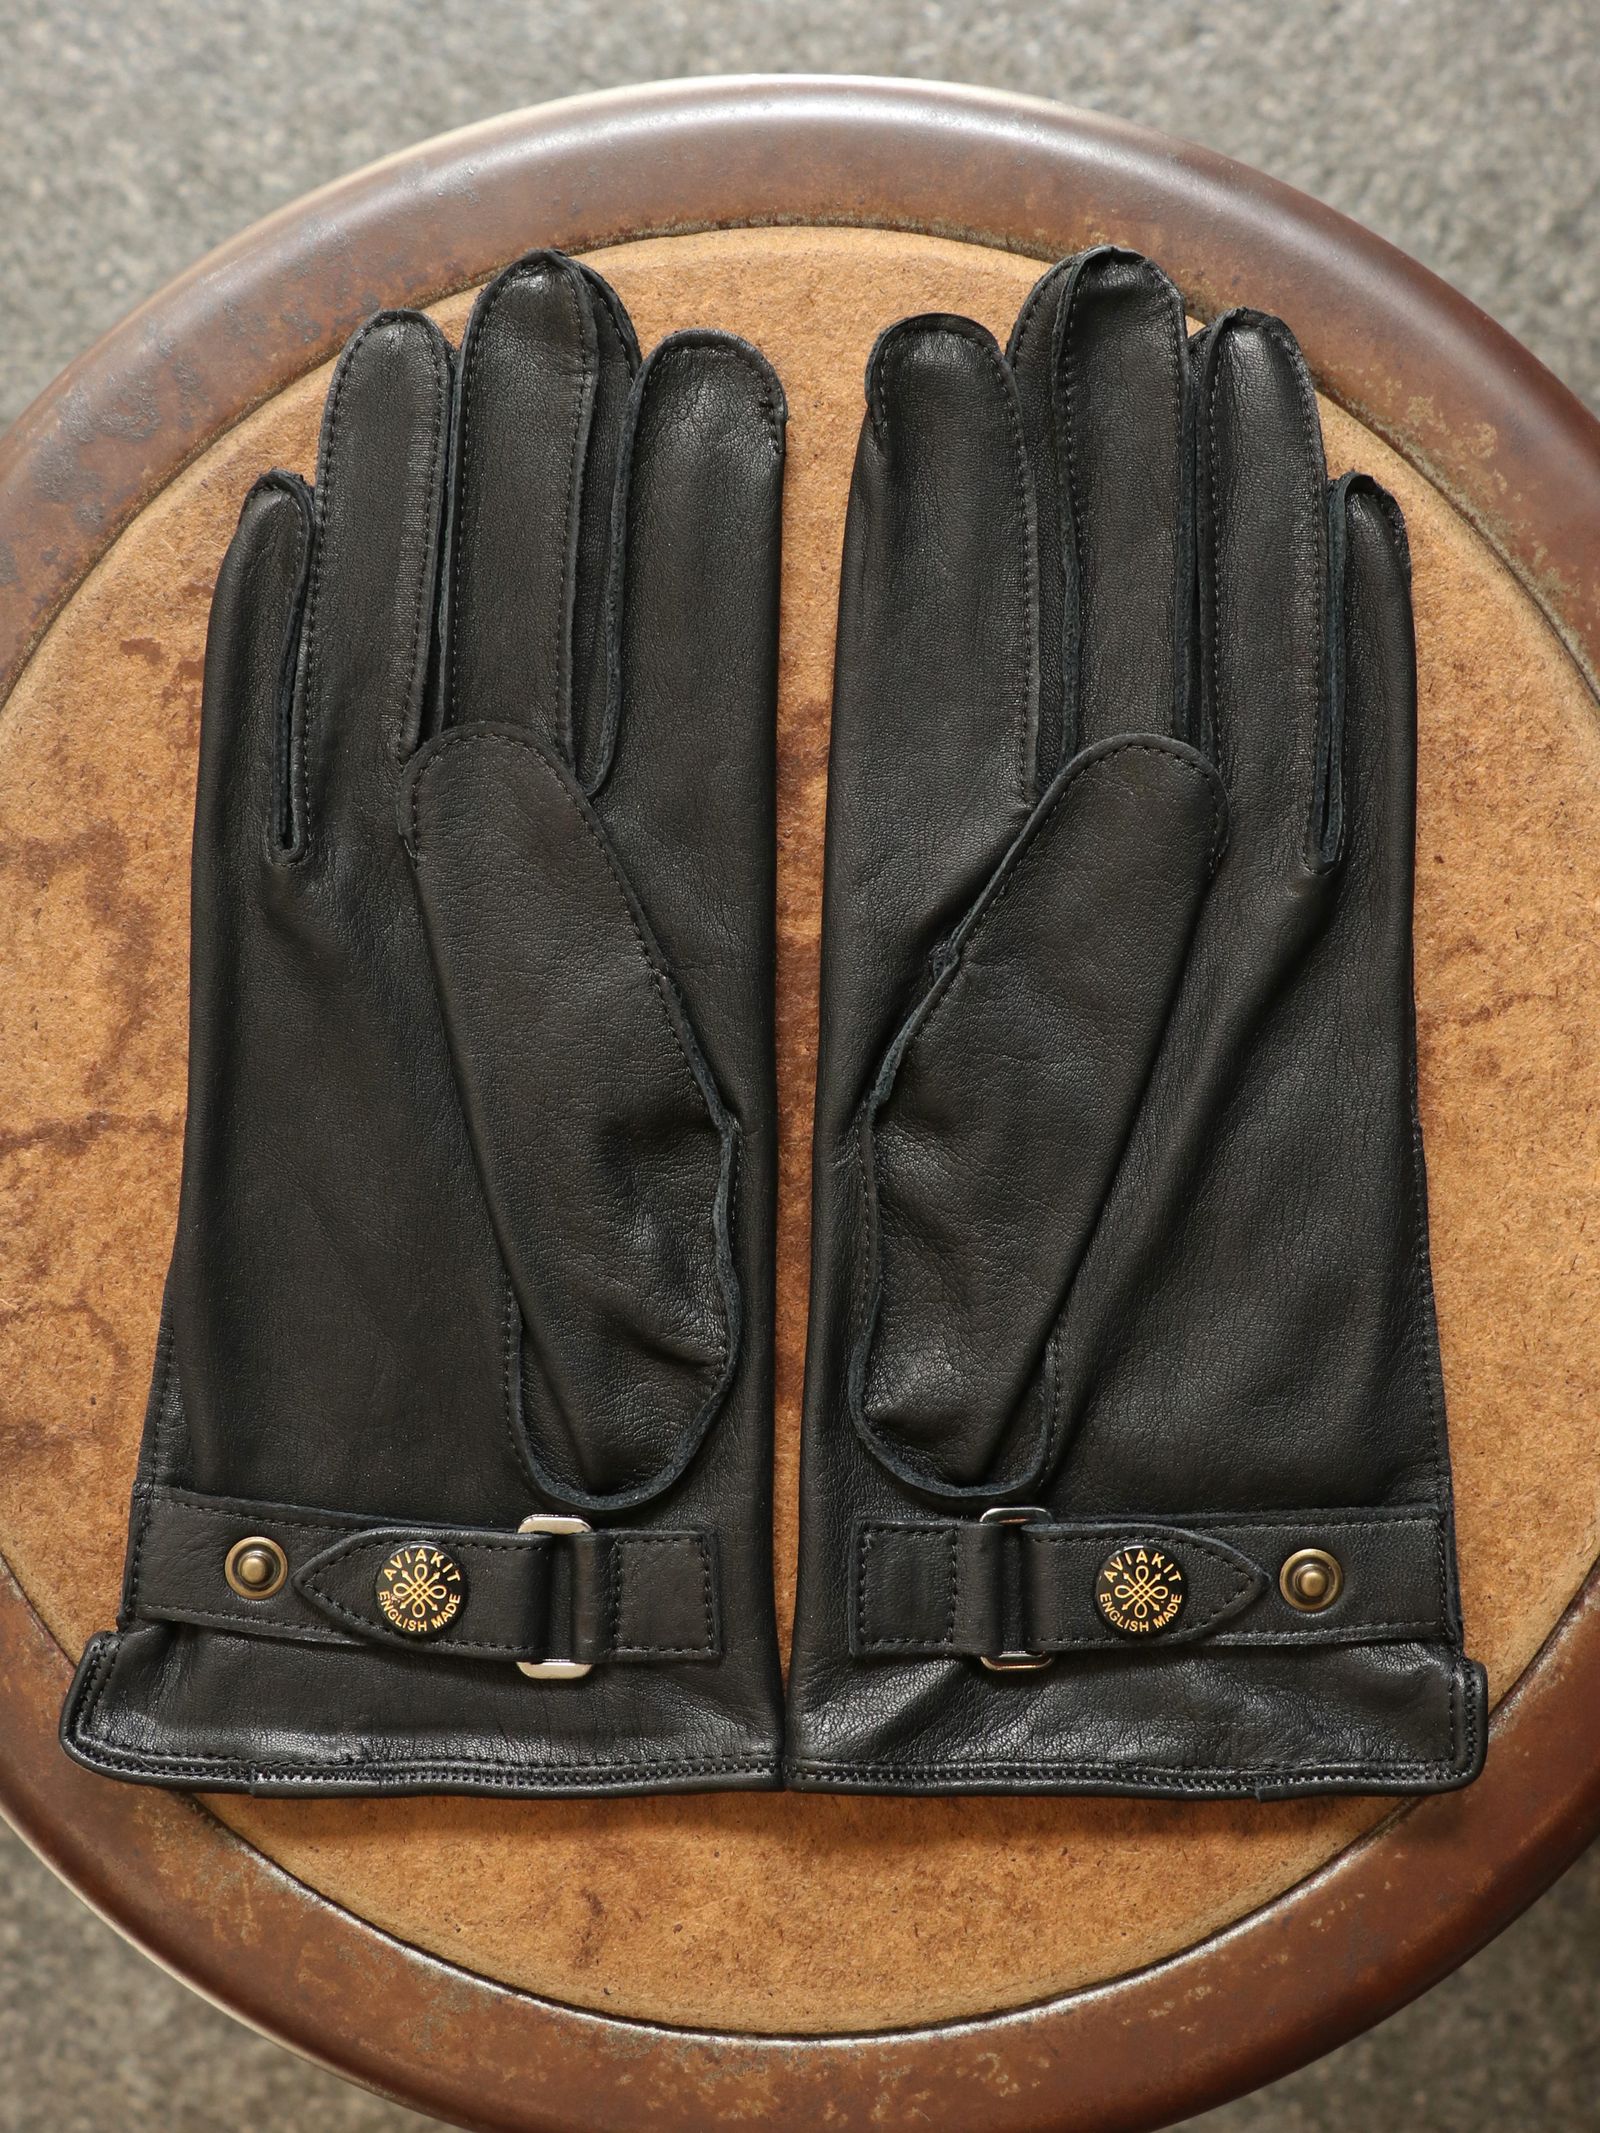 Lewis Leathers - 【即日発送可能】No.810 STRAP GLOVES (COW 